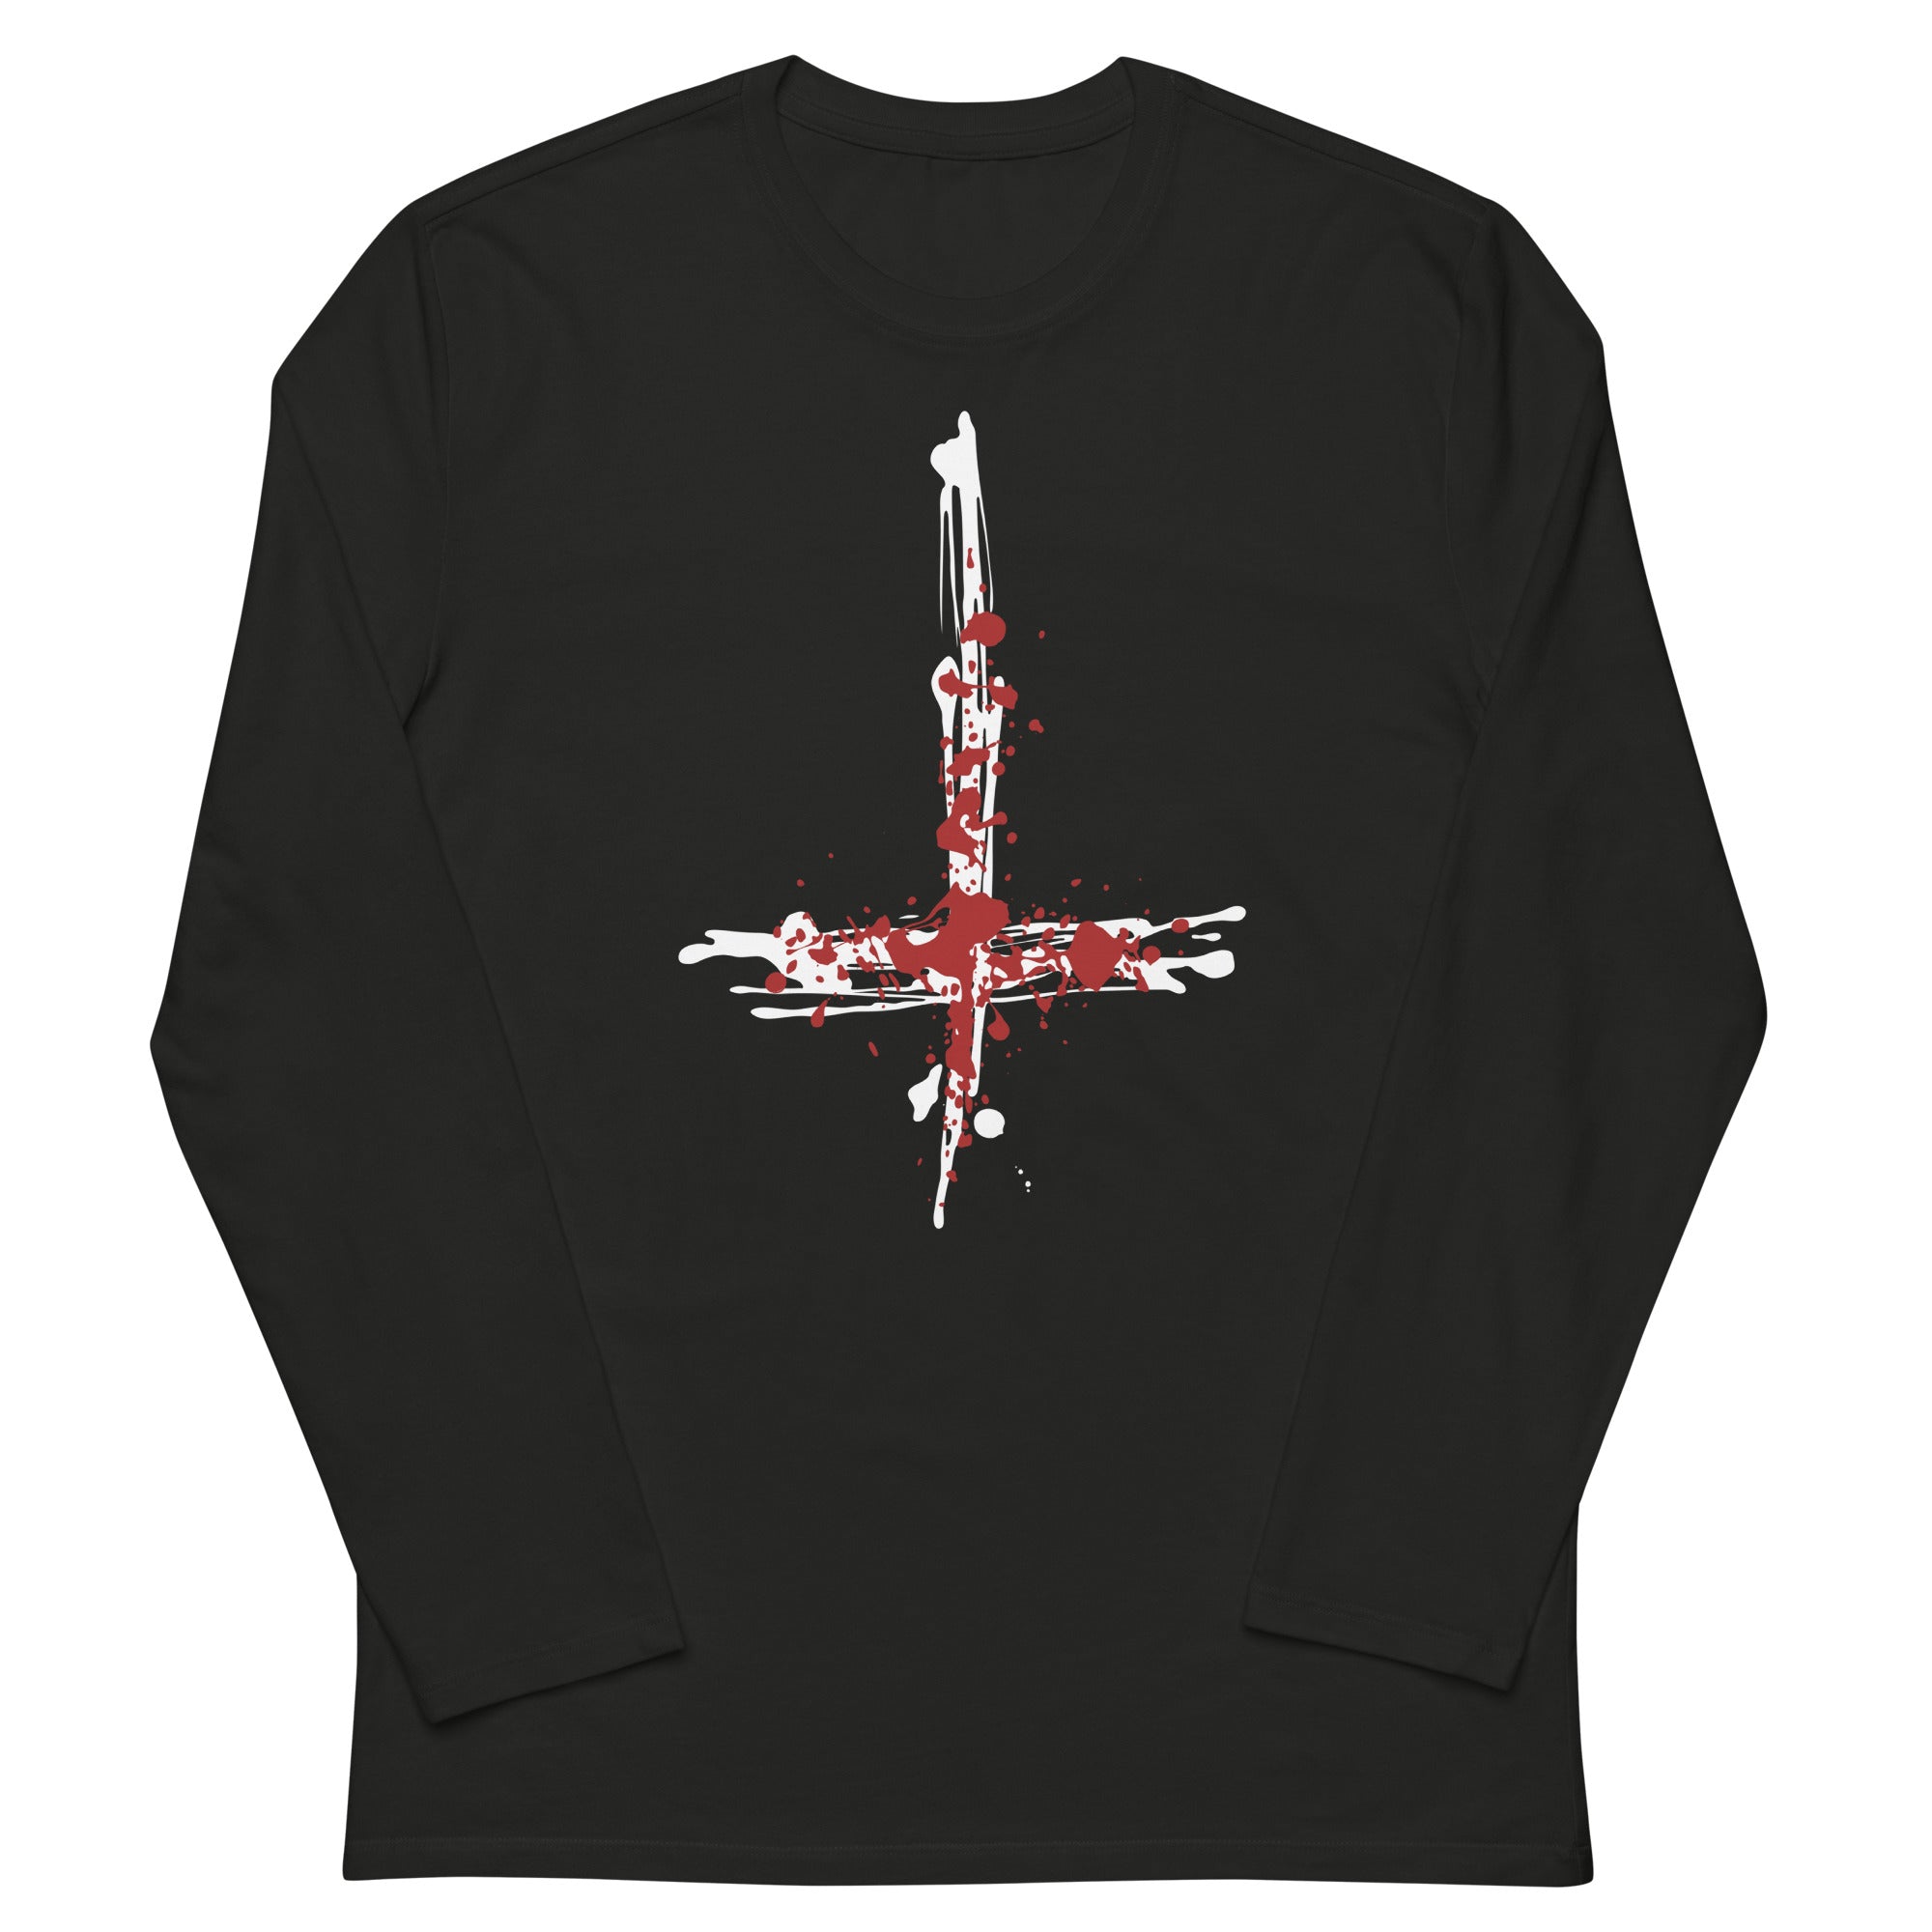 Inverted Cross Blood of Christ Women's fashion long sleeve shirt - Edge of Life Designs